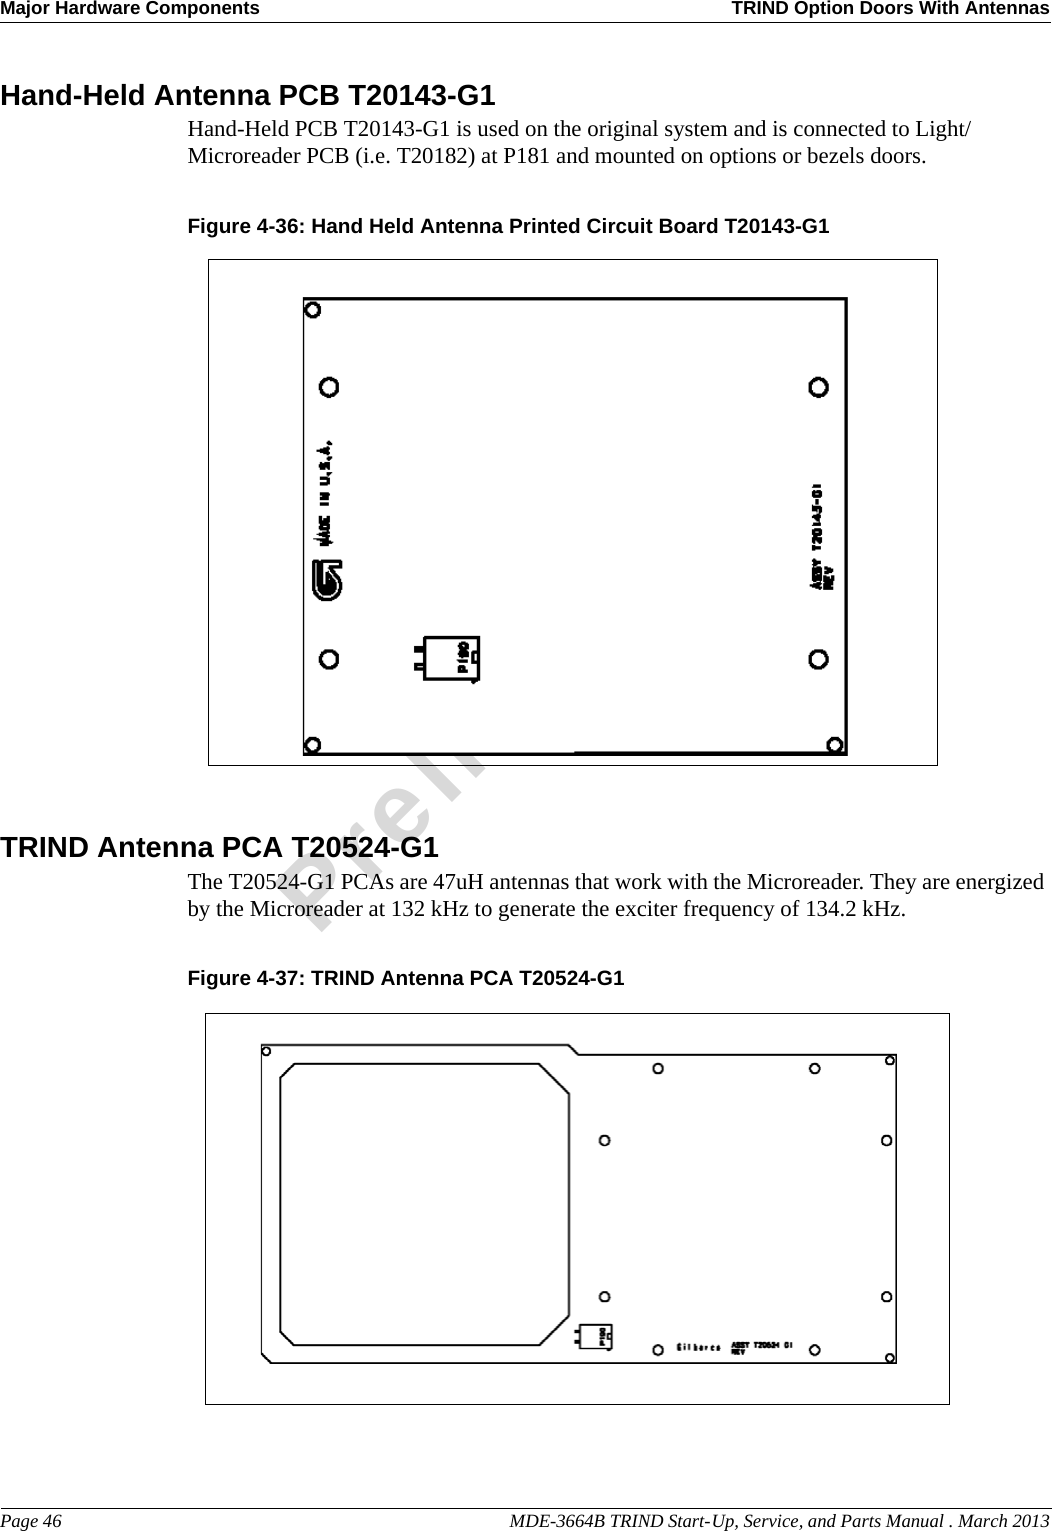 Major Hardware Components TRIND Option Doors With AntennasPage 46                                                                                                  MDE-3664B TRIND Start-Up, Service, and Parts Manual . March 2013PreliminaryHand-Held Antenna PCB T20143-G1Hand-Held PCB T20143-G1 is used on the original system and is connected to Light/Microreader PCB (i.e. T20182) at P181 and mounted on options or bezels doors.Figure 4-36: Hand Held Antenna Printed Circuit Board T20143-G1 TRIND Antenna PCA T20524-G1The T20524-G1 PCAs are 47uH antennas that work with the Microreader. They are energized by the Microreader at 132 kHz to generate the exciter frequency of 134.2 kHz.Figure 4-37: TRIND Antenna PCA T20524-G1 